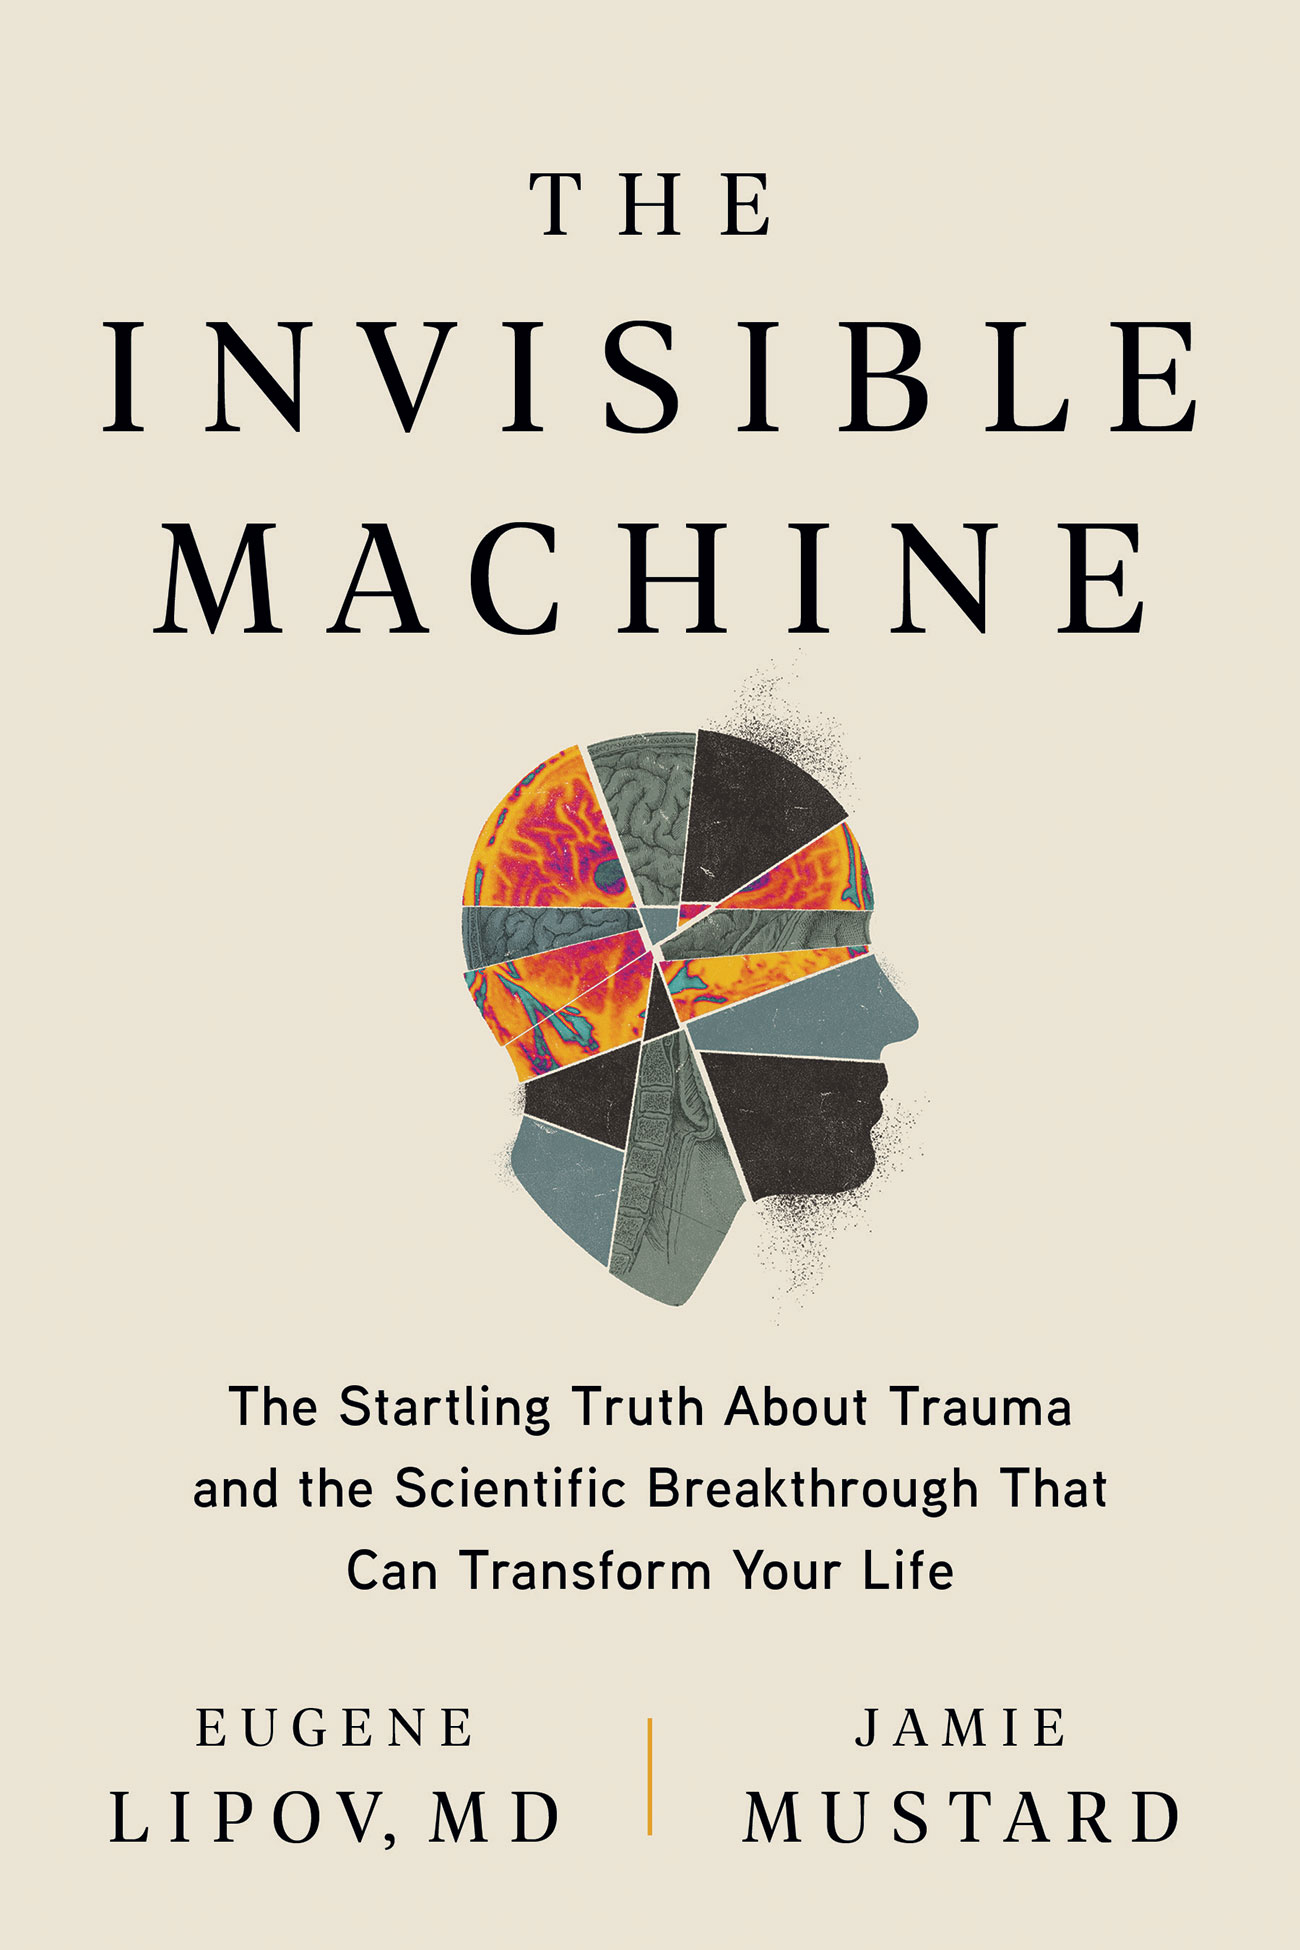 The Startling Truth About Trauma and the Scientific Breakthrough That Can Transform Your Life